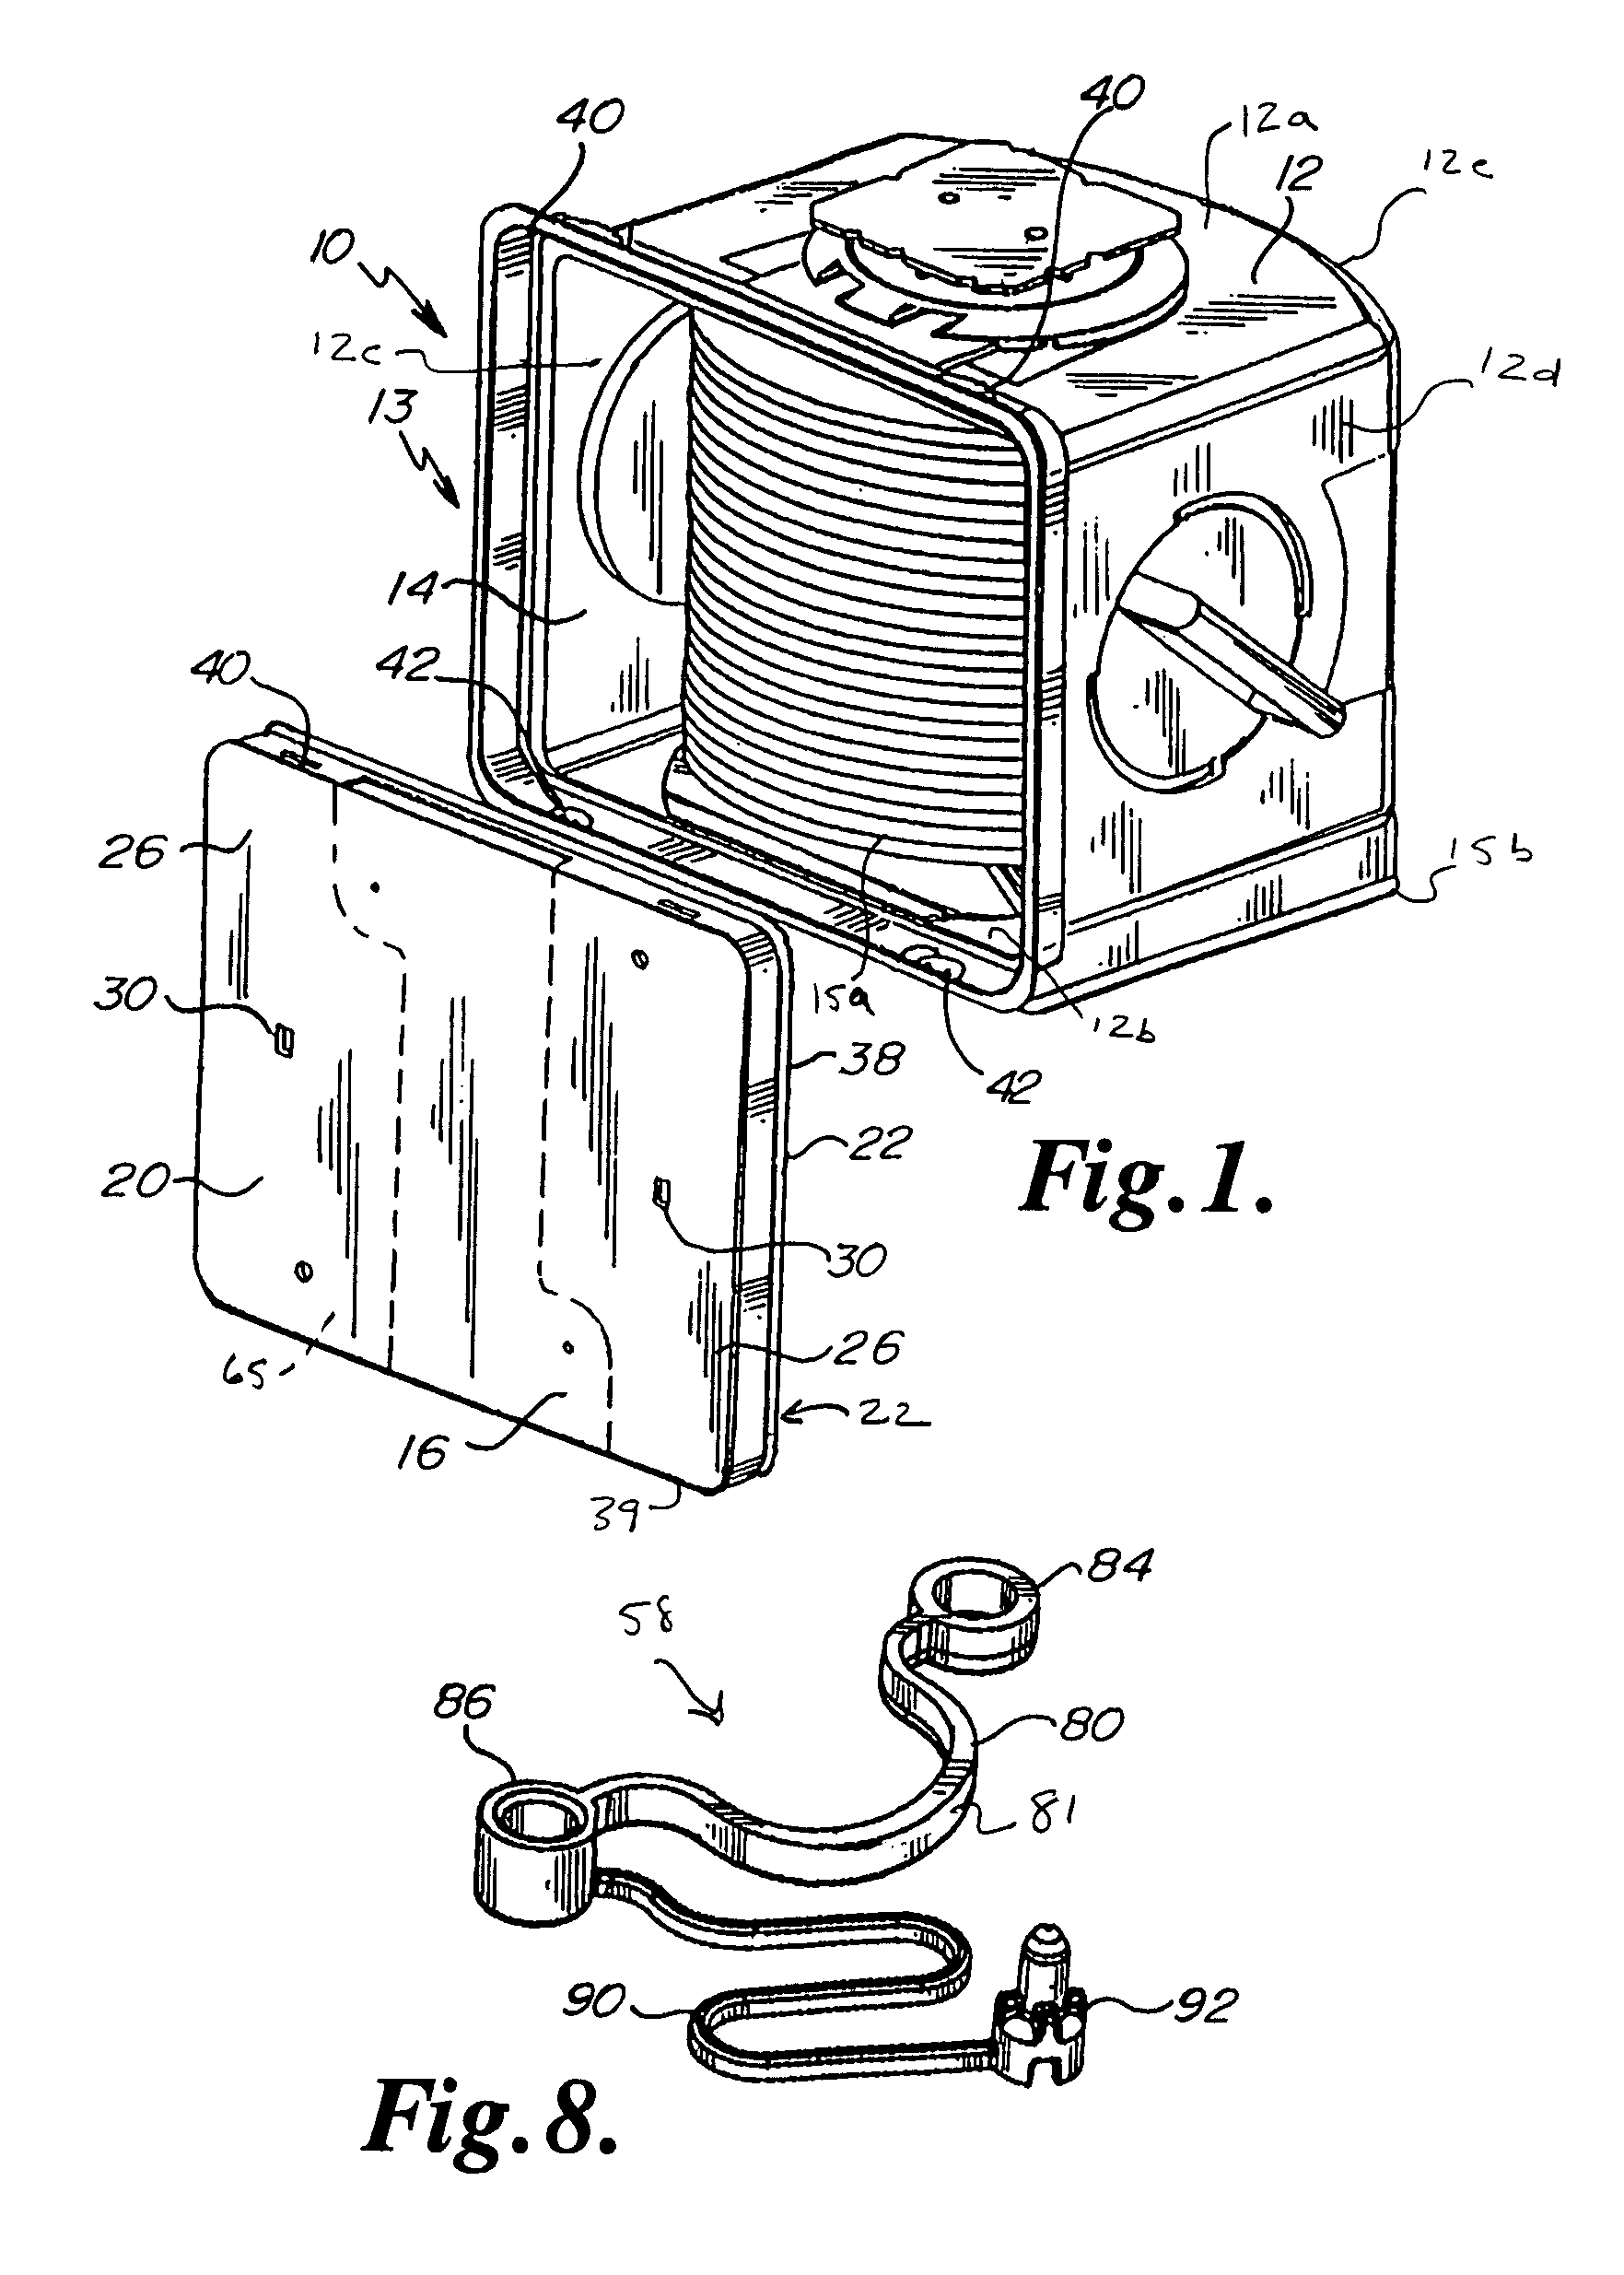 Wafer container and door with vibration dampening latching mechanism